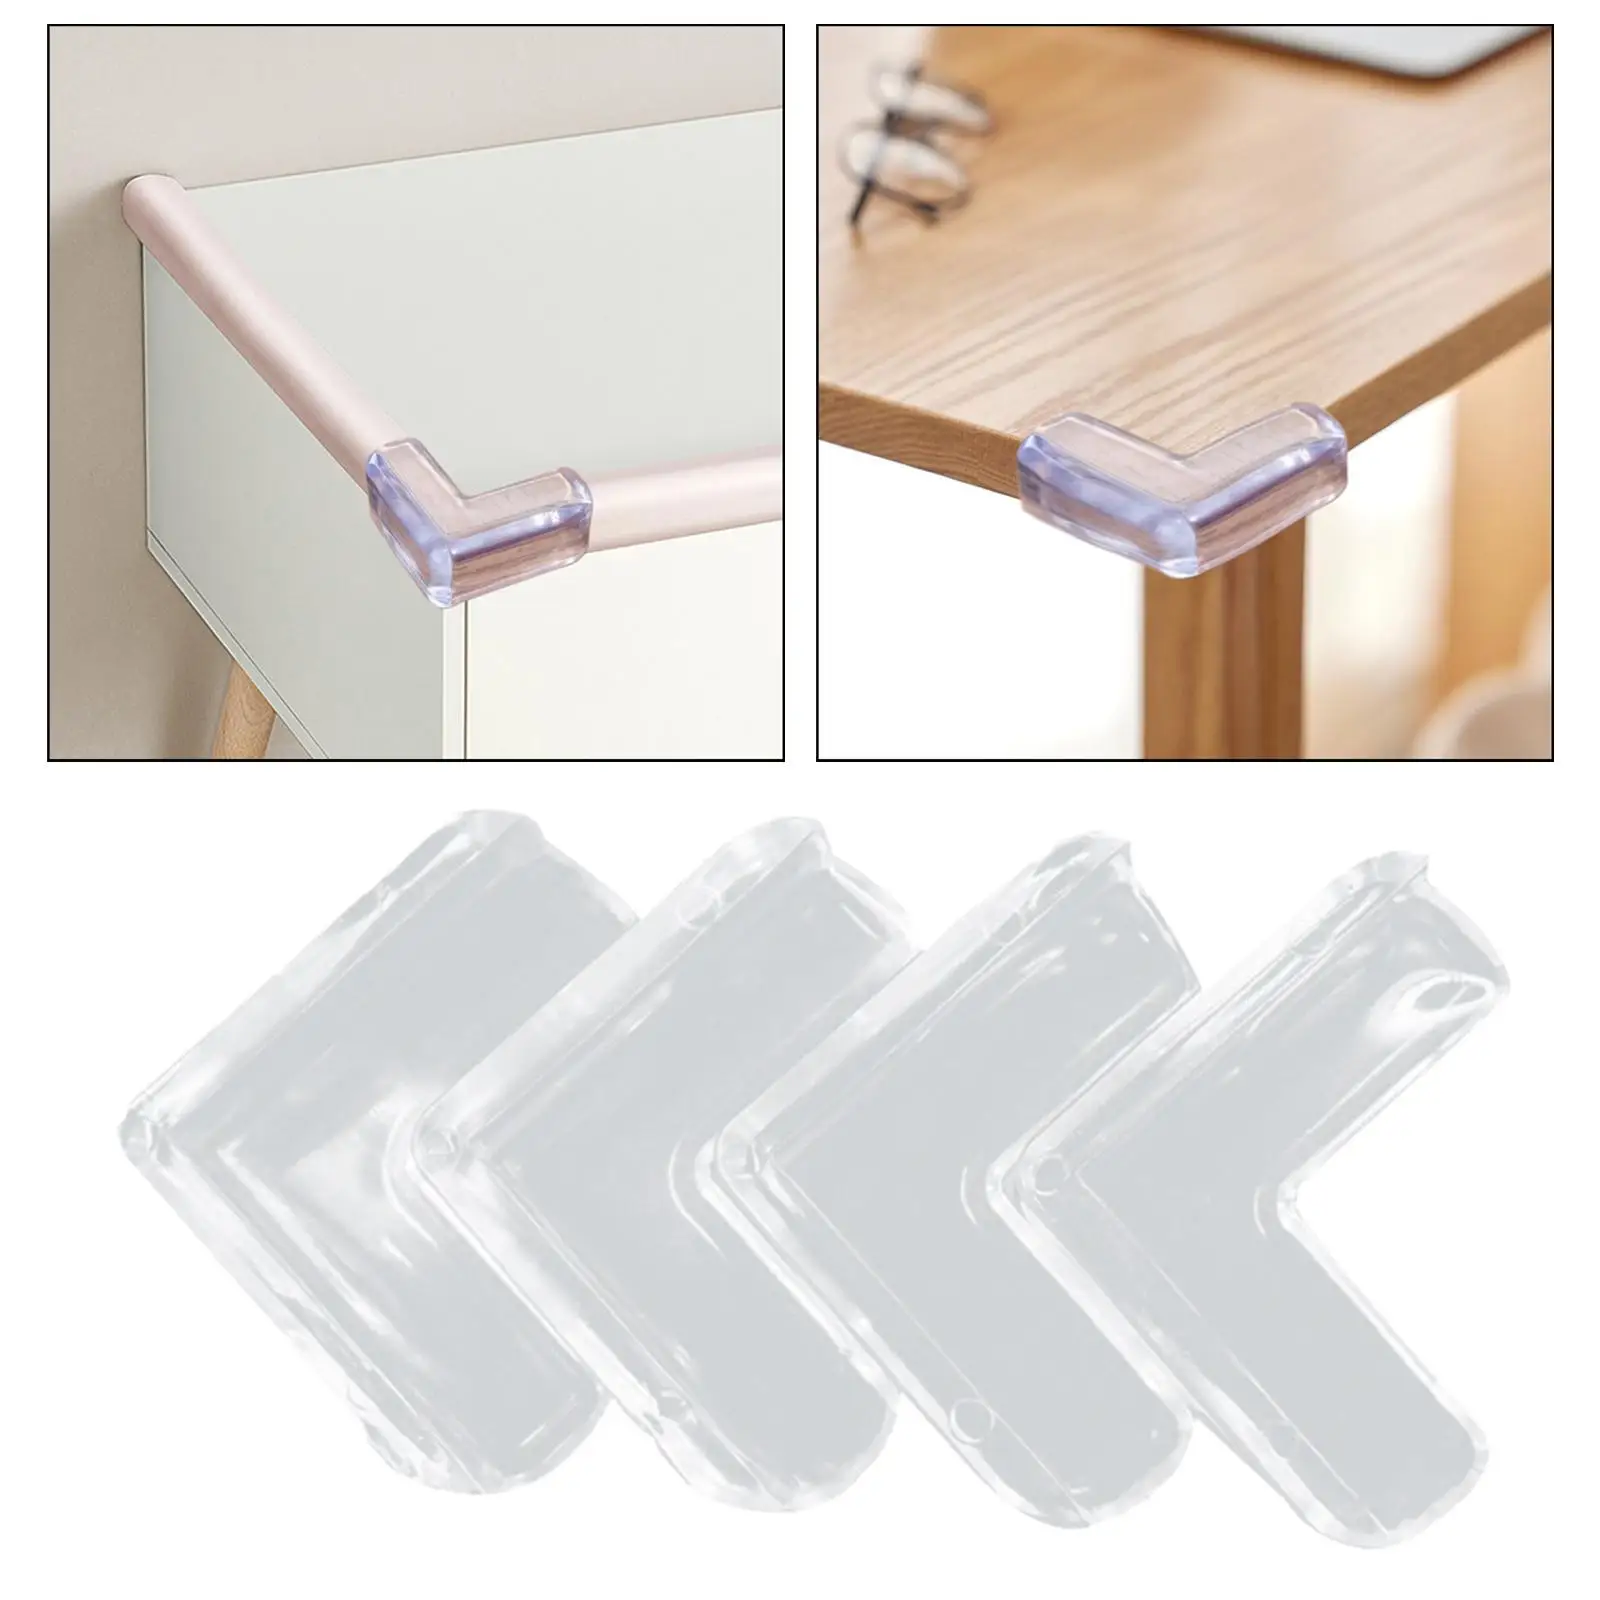 4x Table Corner Protectors Baby Proofing Anti Collision Buffer for Cupboard